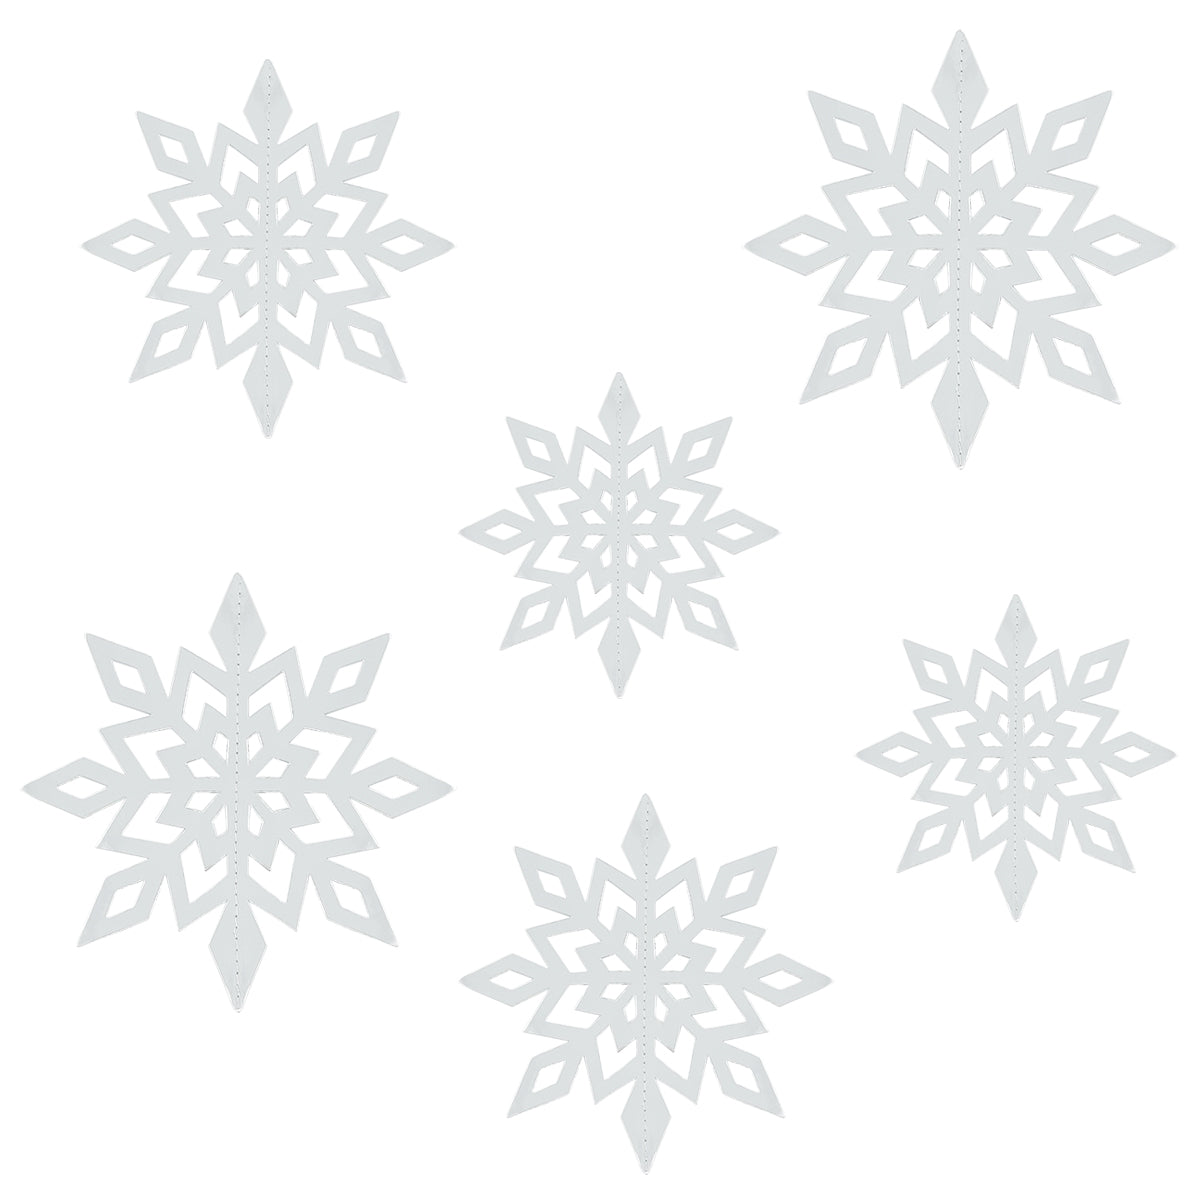 White snowflakes collection transparent background